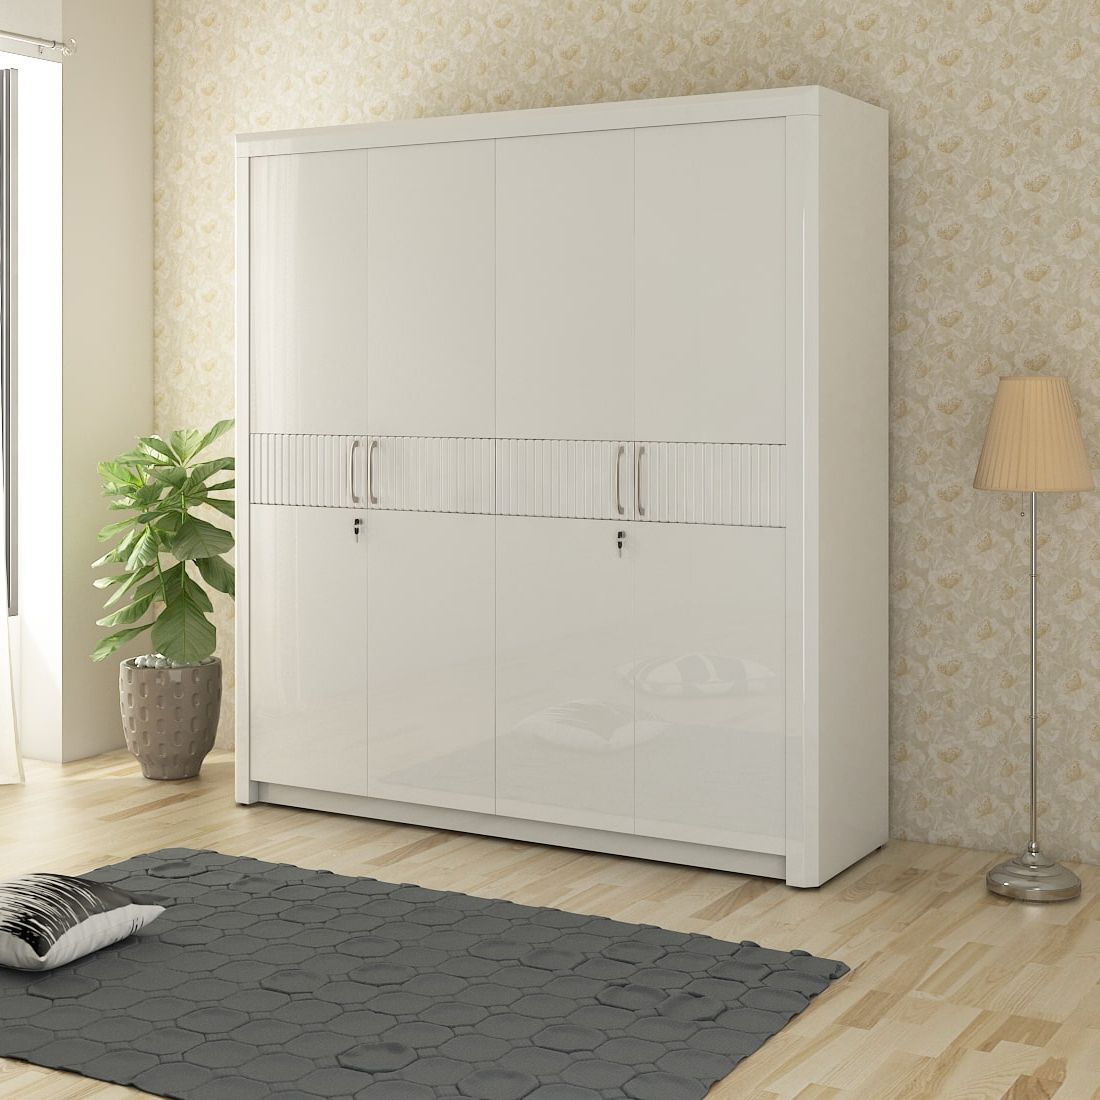 Preferred Arctic White Wardrobes Intended For Kosmo Arctic 4 Door Wardrobe High Gloss White (View 5 of 10)